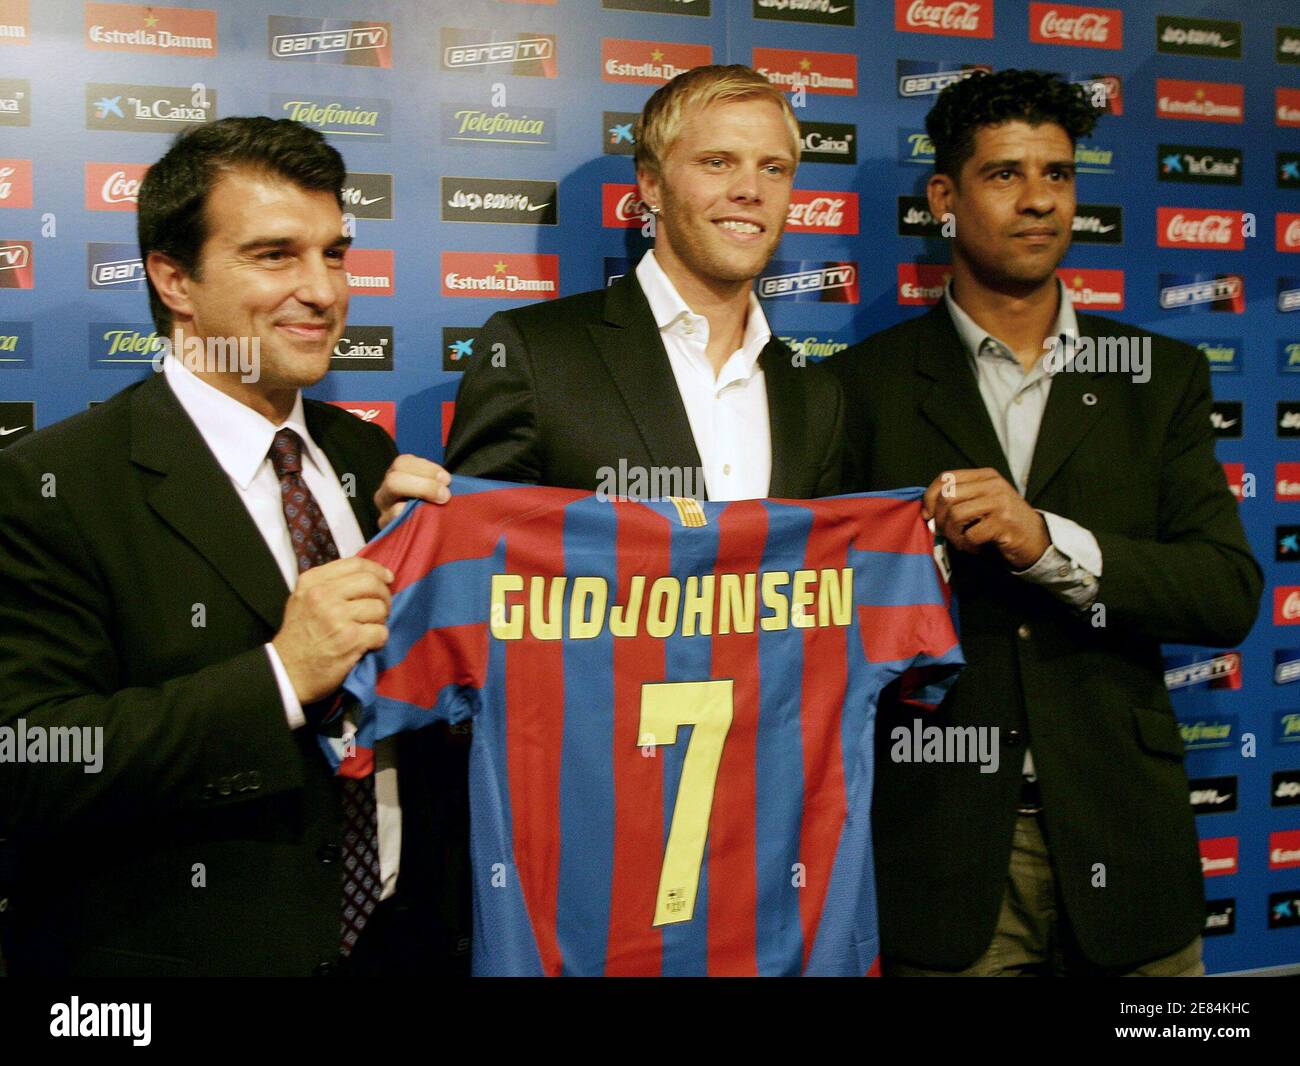 Barcelona's President Joan Laporta (L), Icelandic striker Eidur Gudjohnsen (C) shows the club jersey with Dutch coach Frank Rijkaard before a news conference at Nou Camp stadium in Barcelona, Spain June 14, 2006.  Gudjohnsen signed a four-year contract with Barcelona.  REUTERS/Gustau Nacarino (SPAIN) Stock Photo